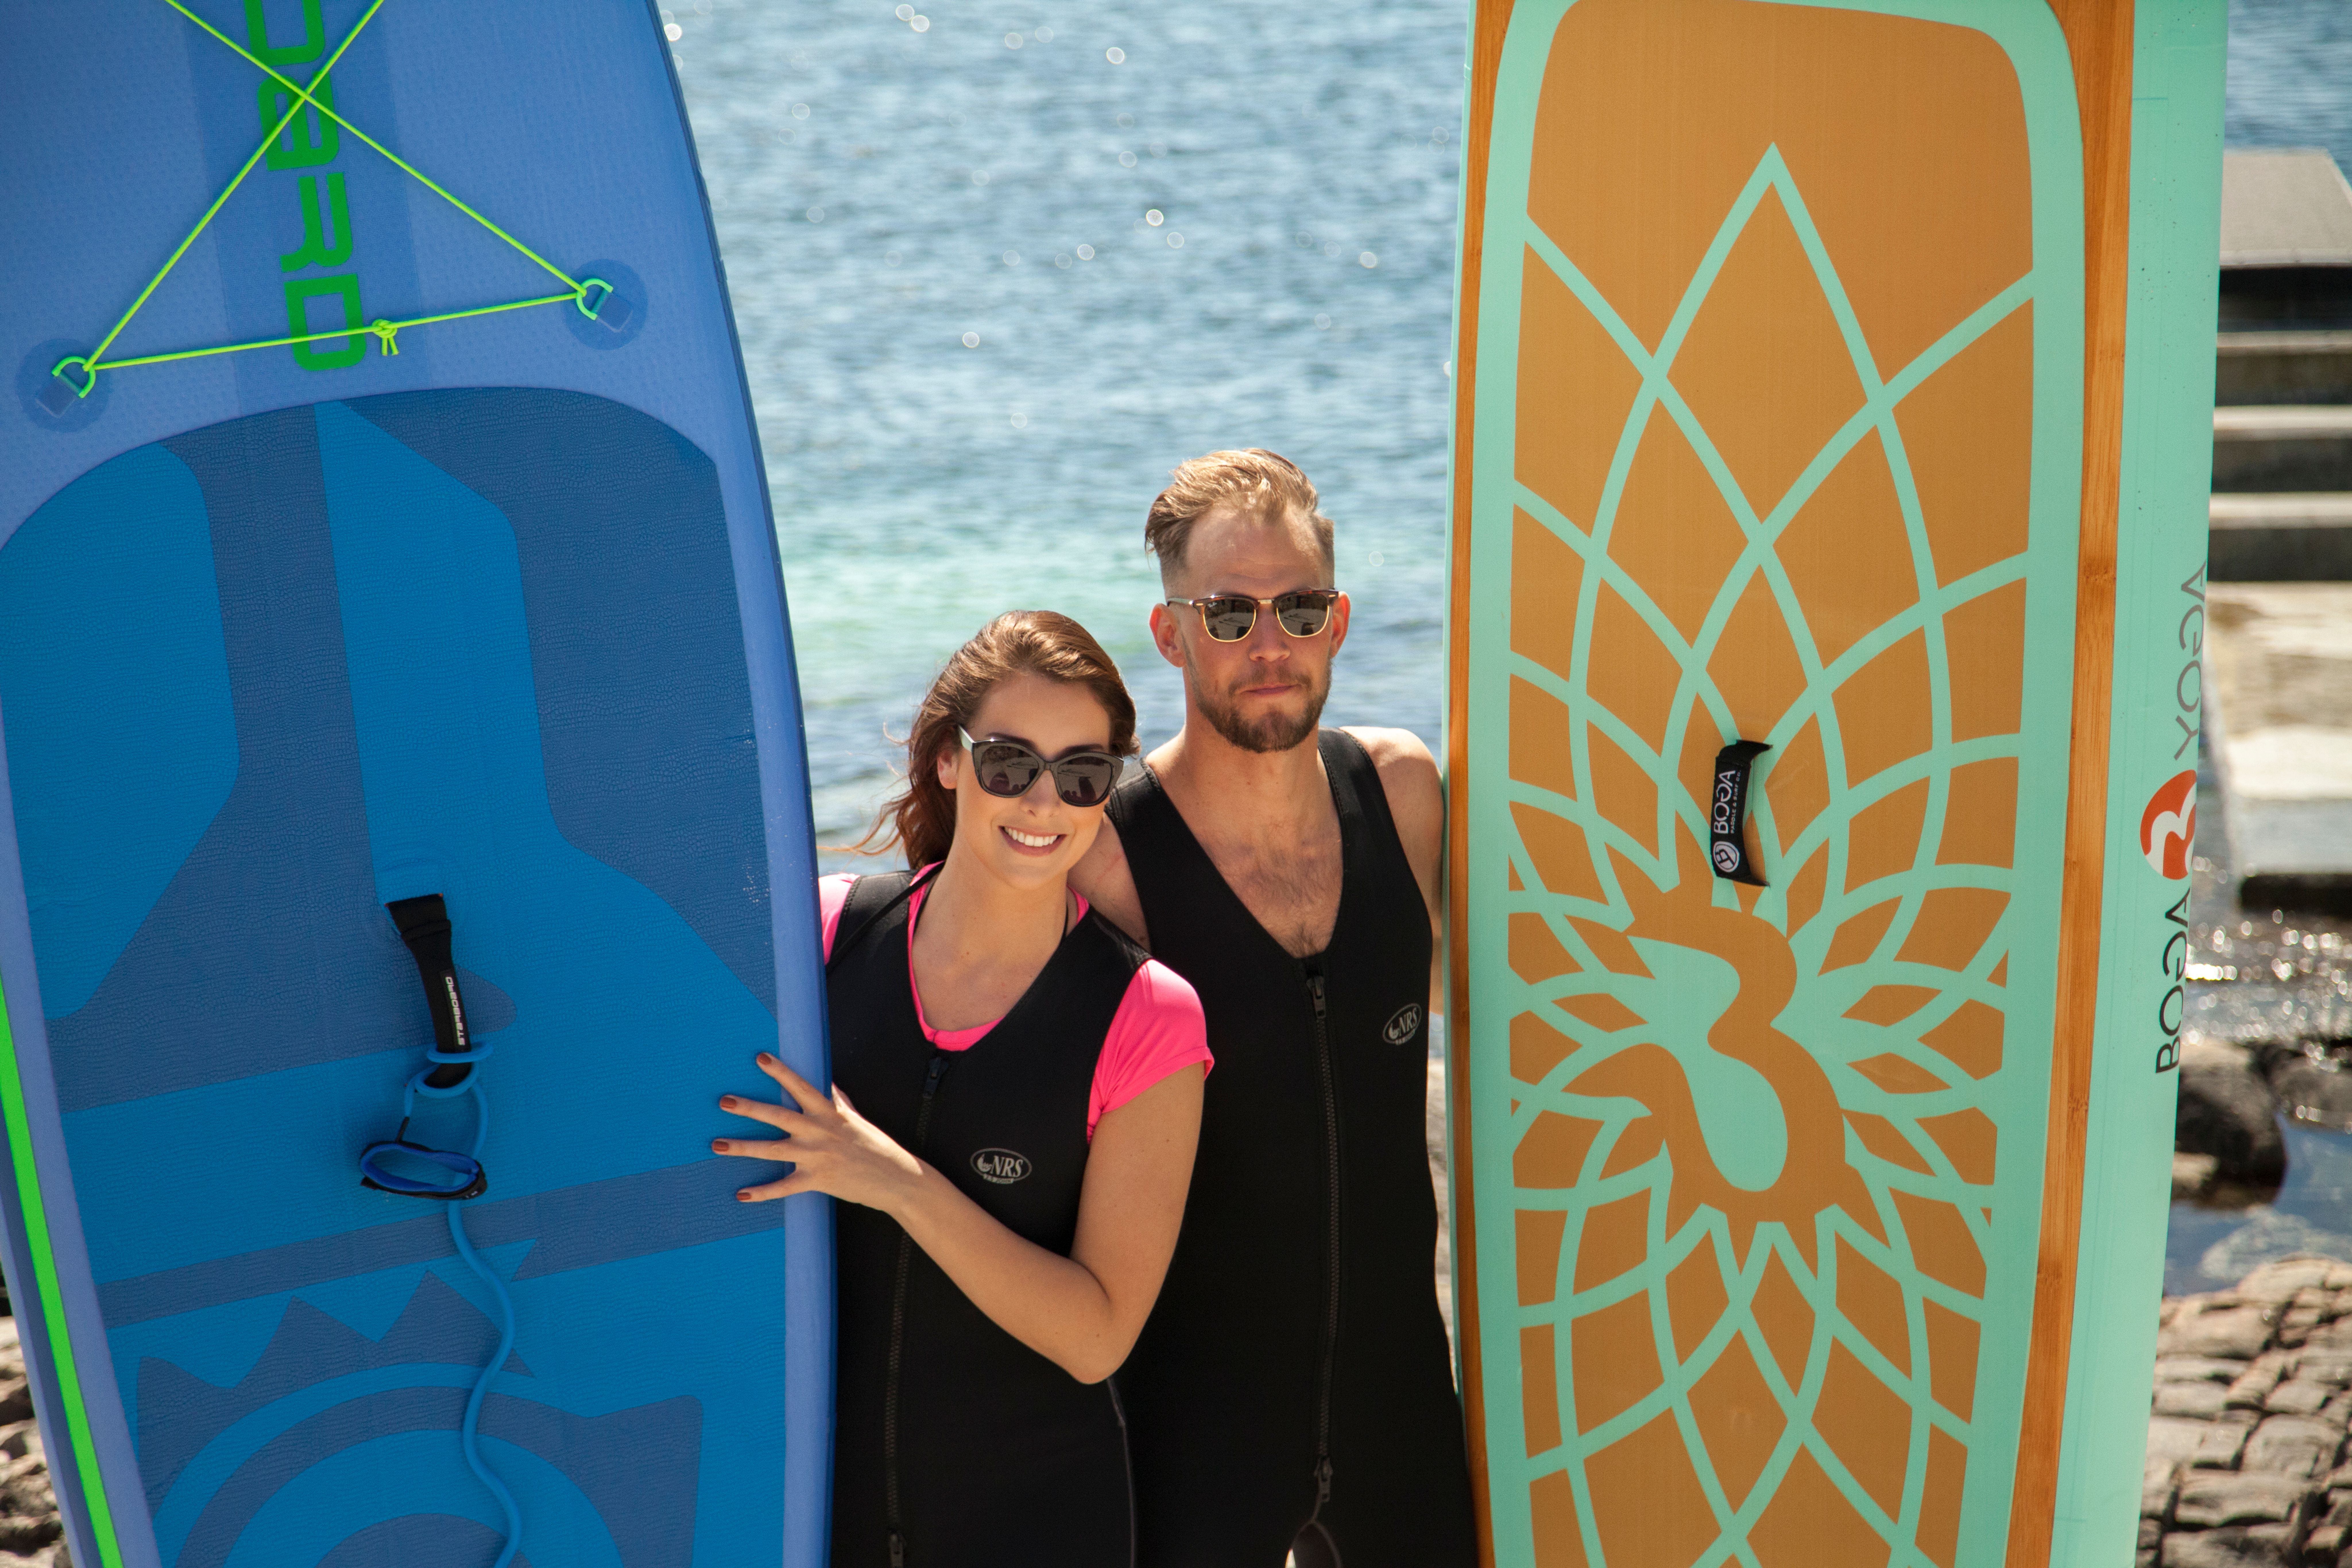 A young couple posing with SUP boards at the beach on Panorama hotel